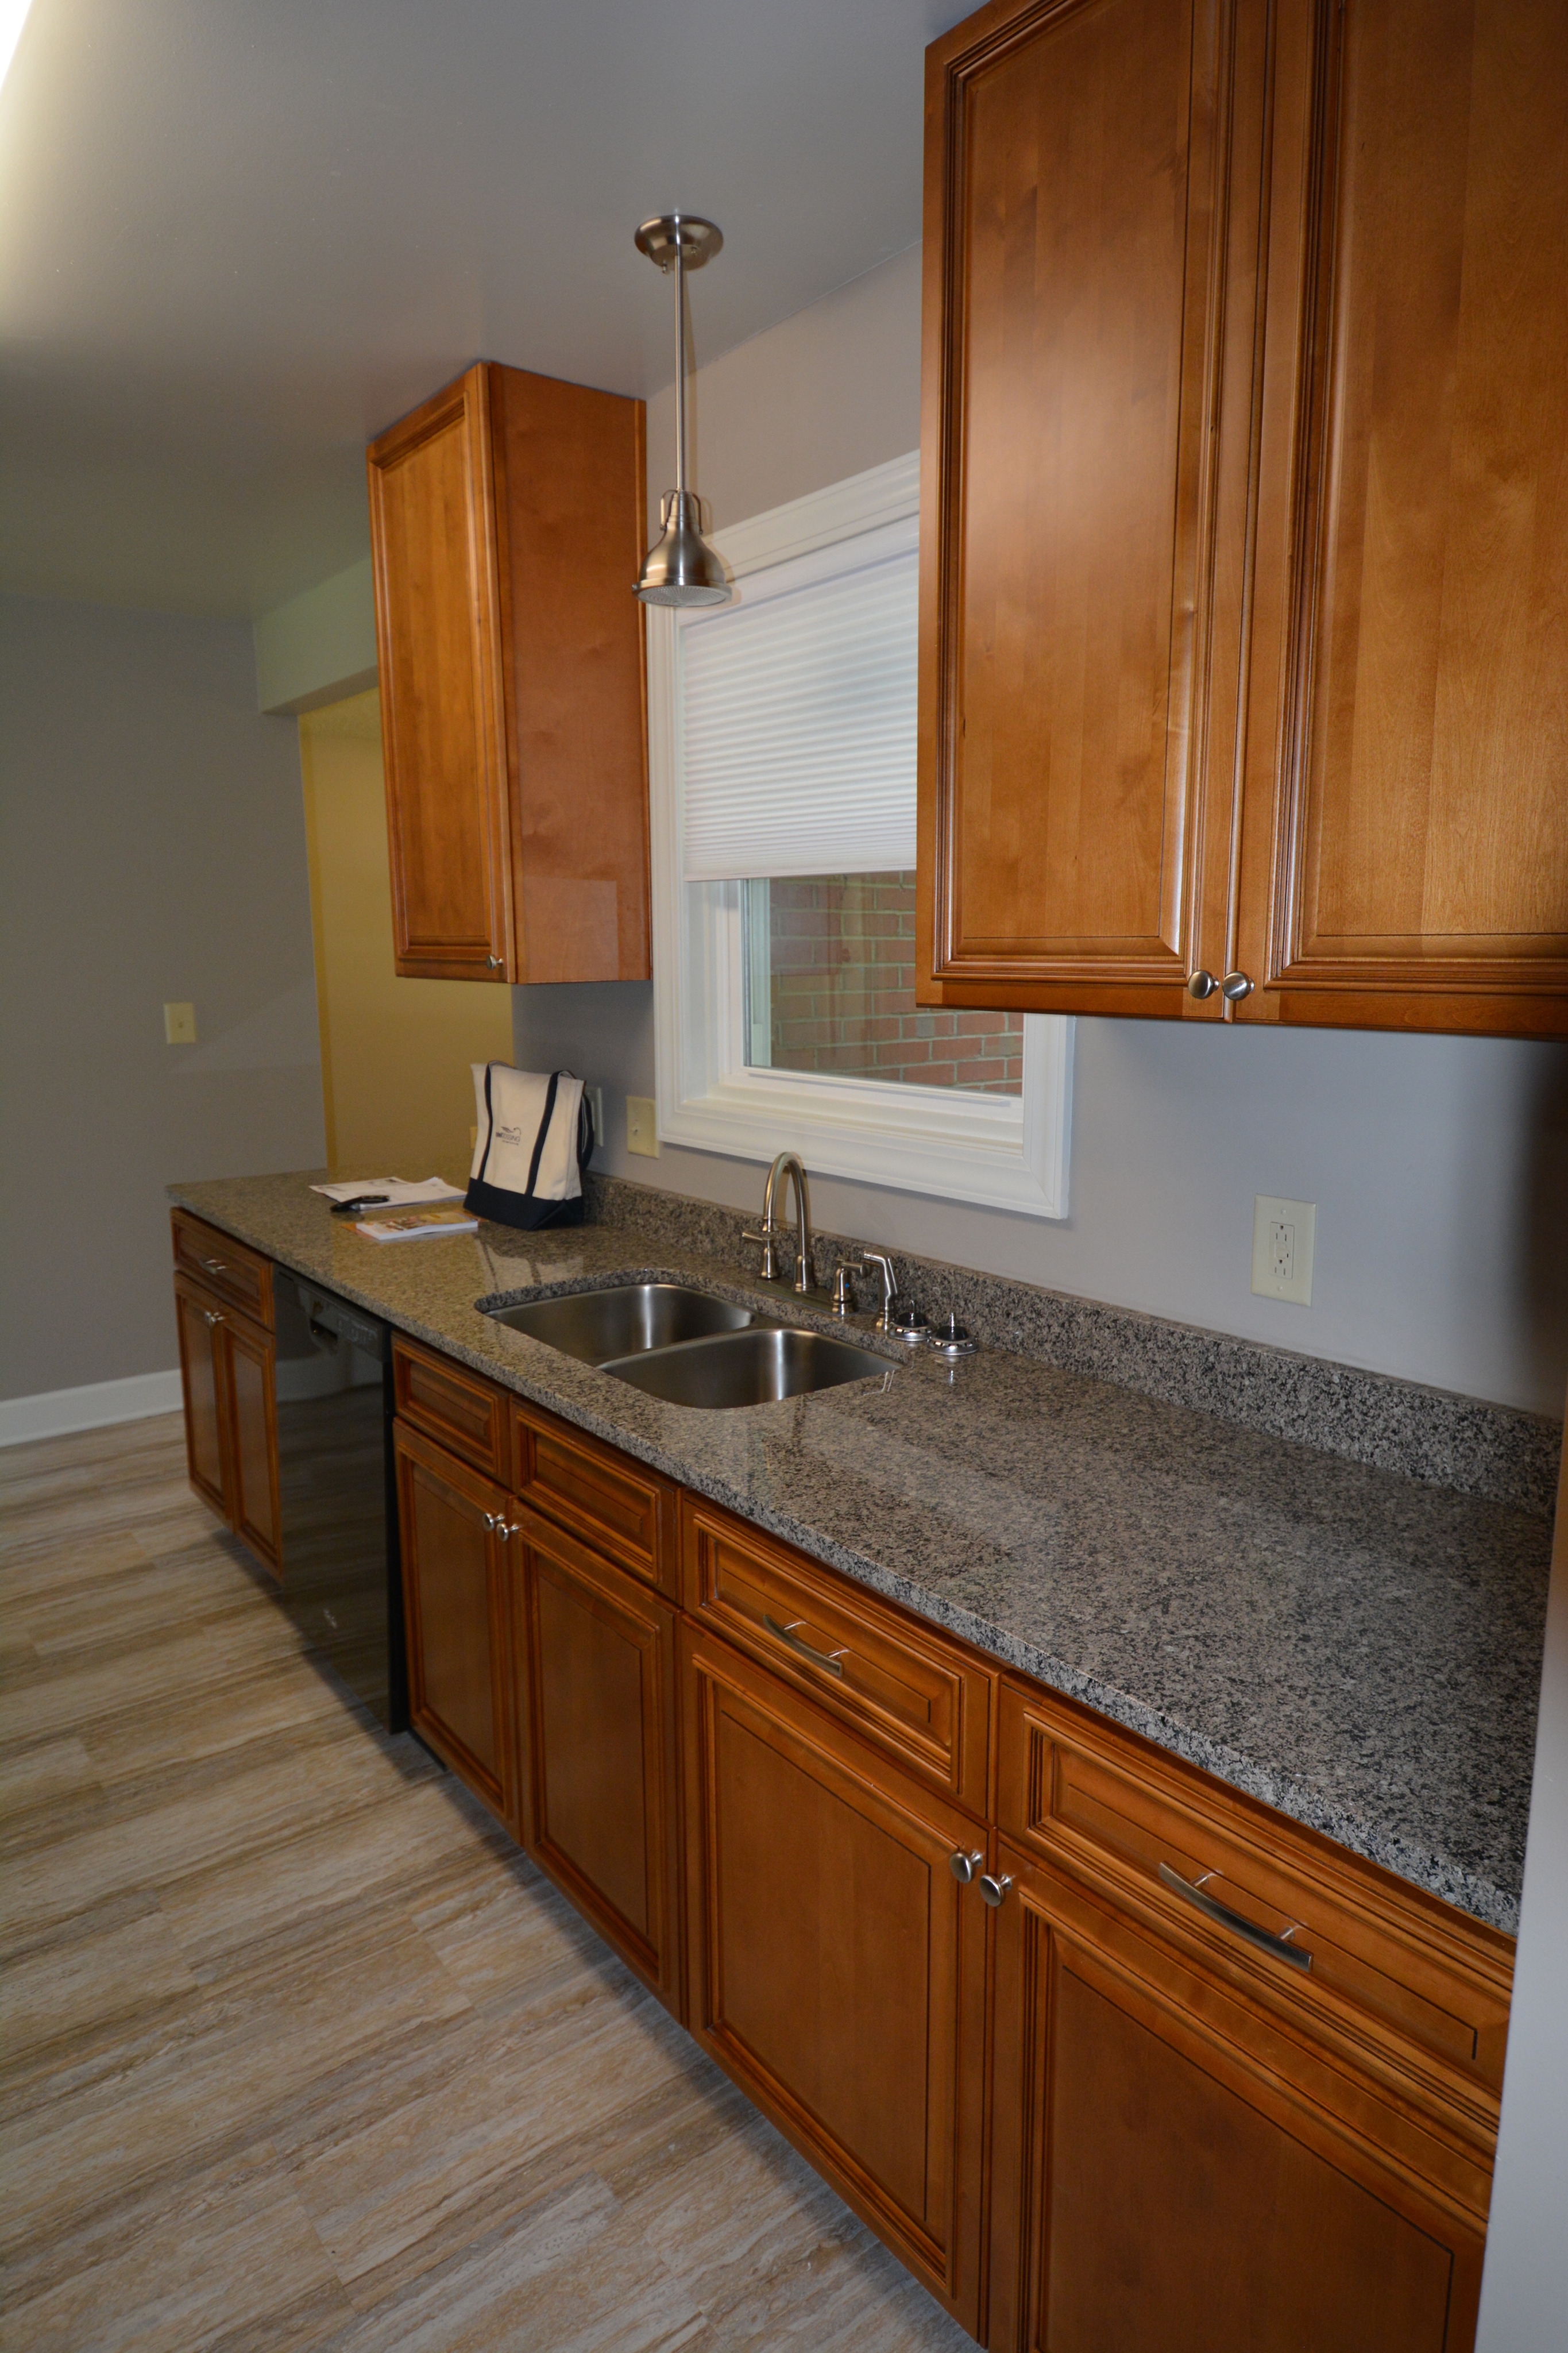 Modern Kitchen | Fort Campbell KY Apartment For Rent | Campbell Crossing